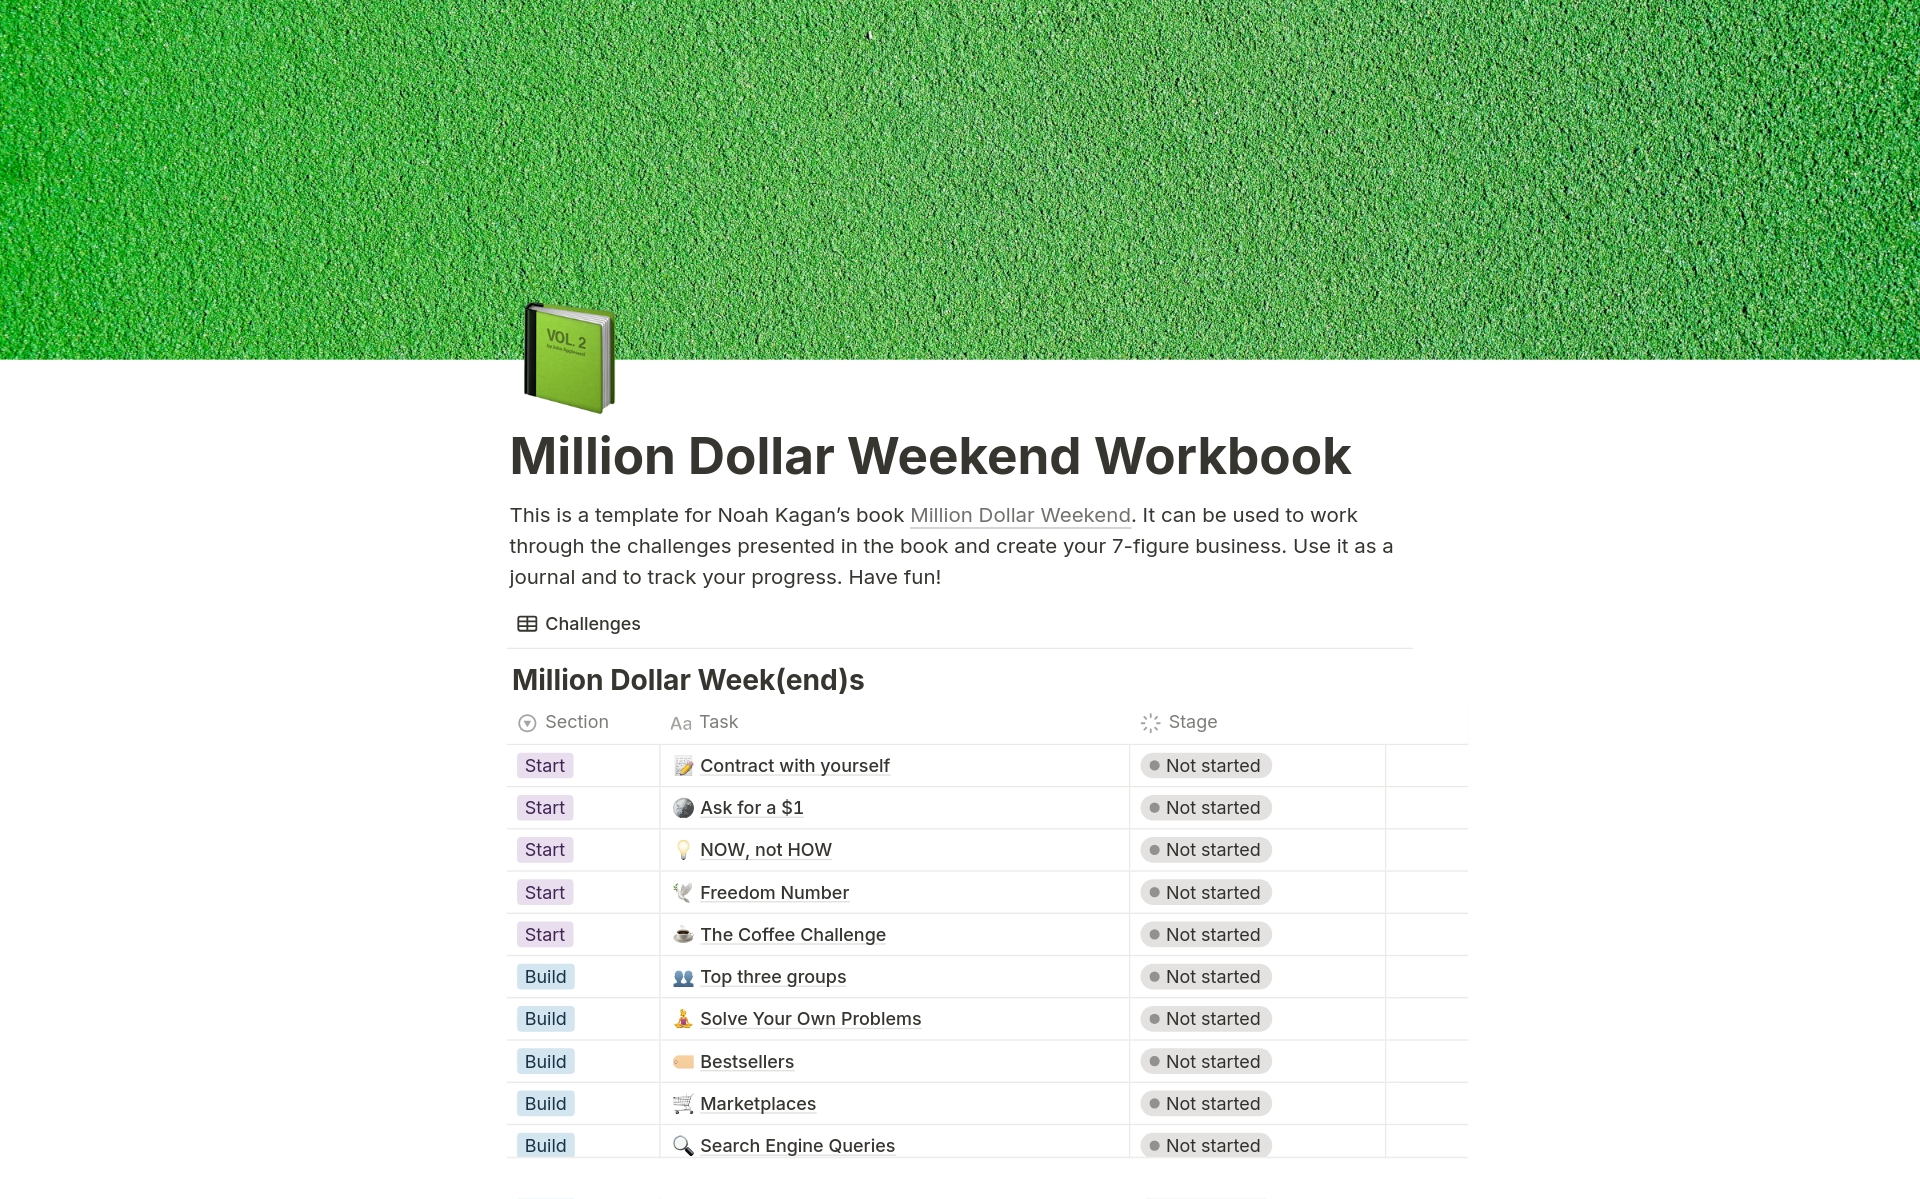 This is a workbook for Noah Kagan’s book Million Dollar Weekend.